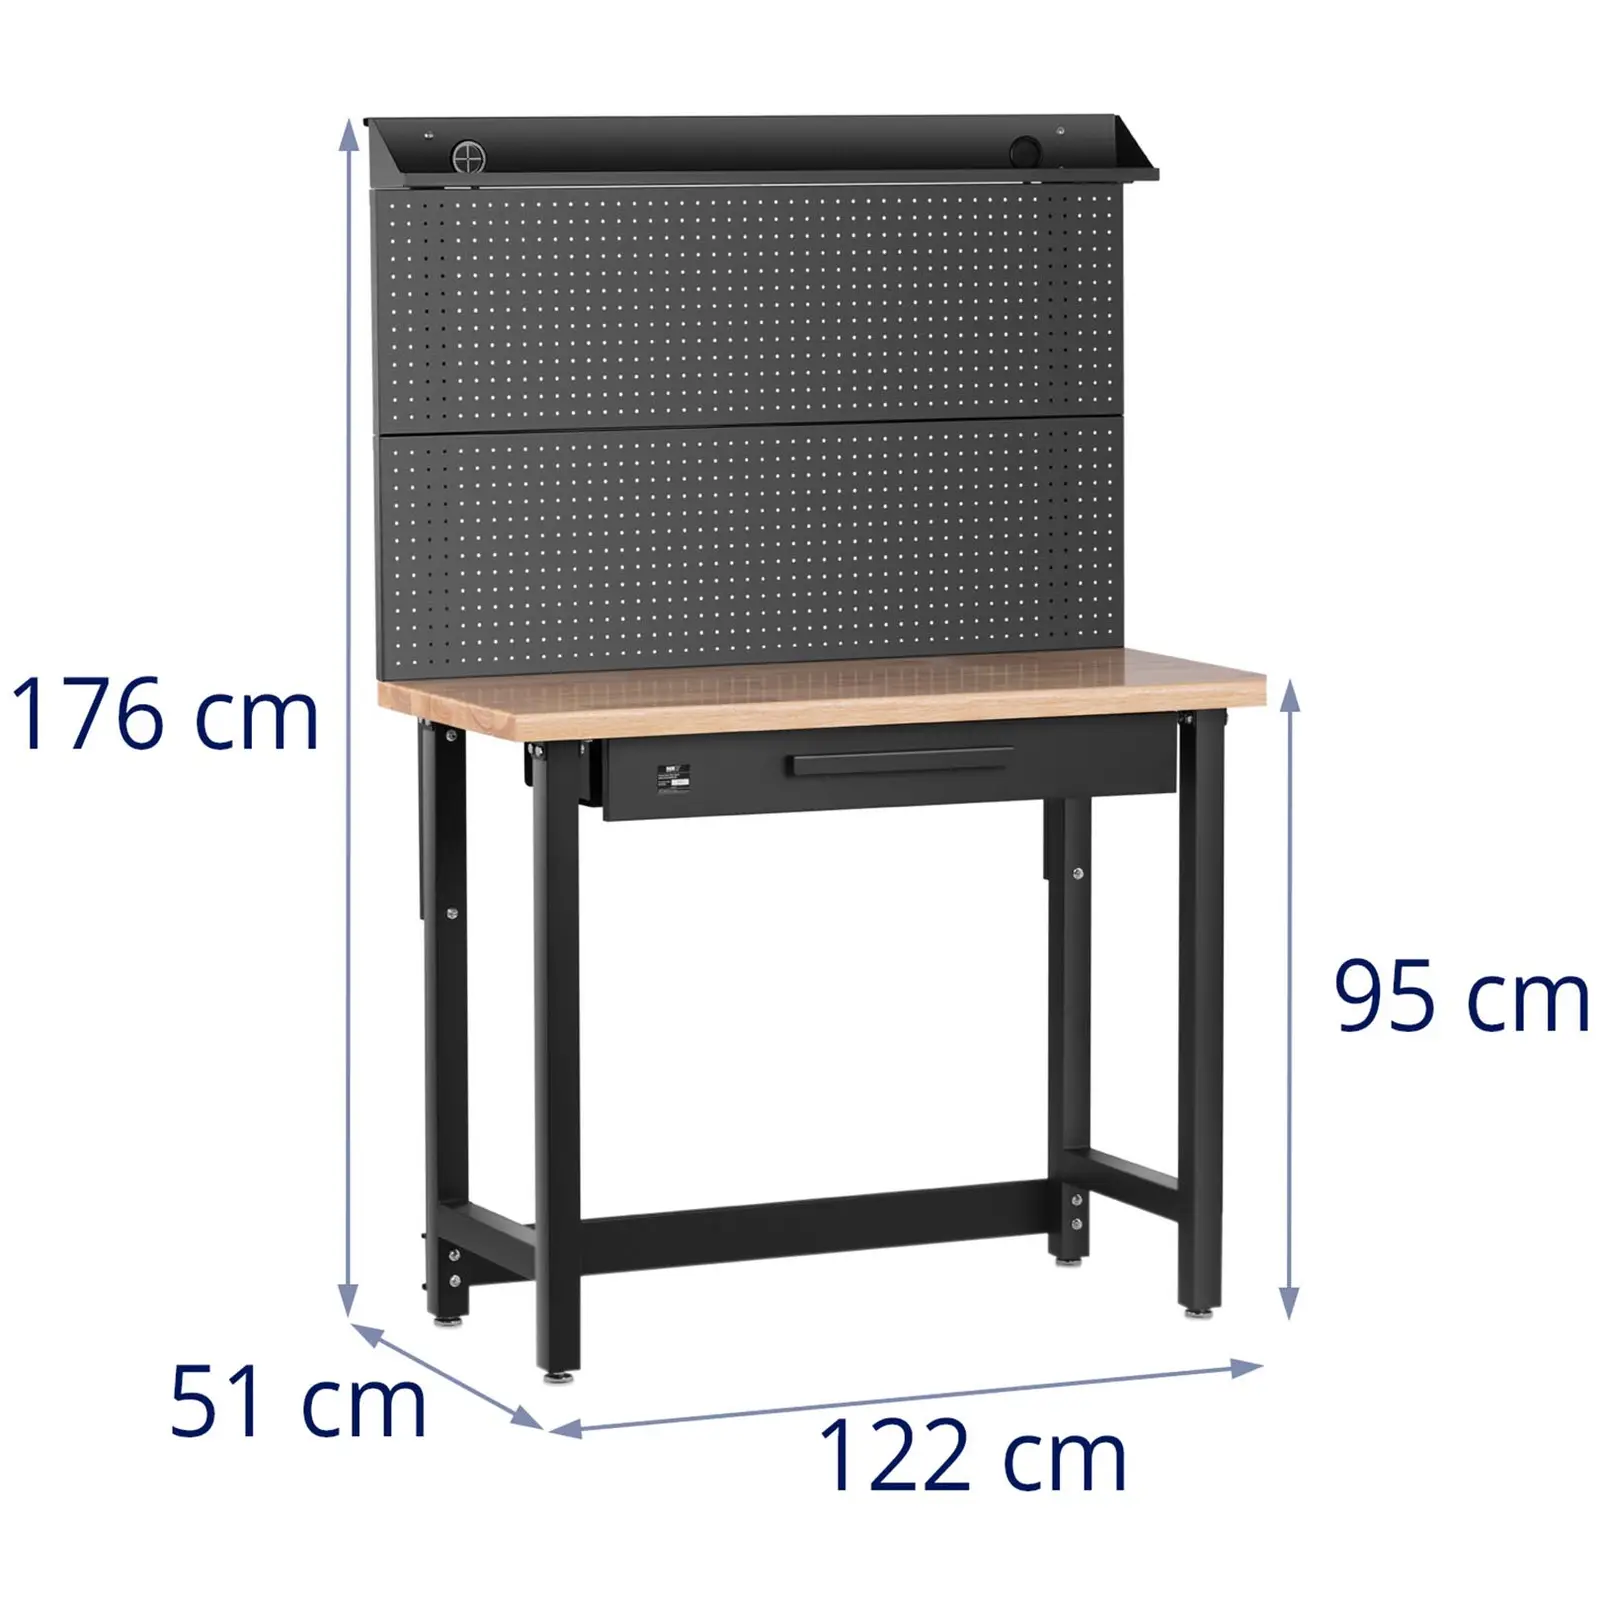 Workbench - 155 x 51 cm - height adjustable 95 - 176 cm - 227 kg - with drawer and pegboard